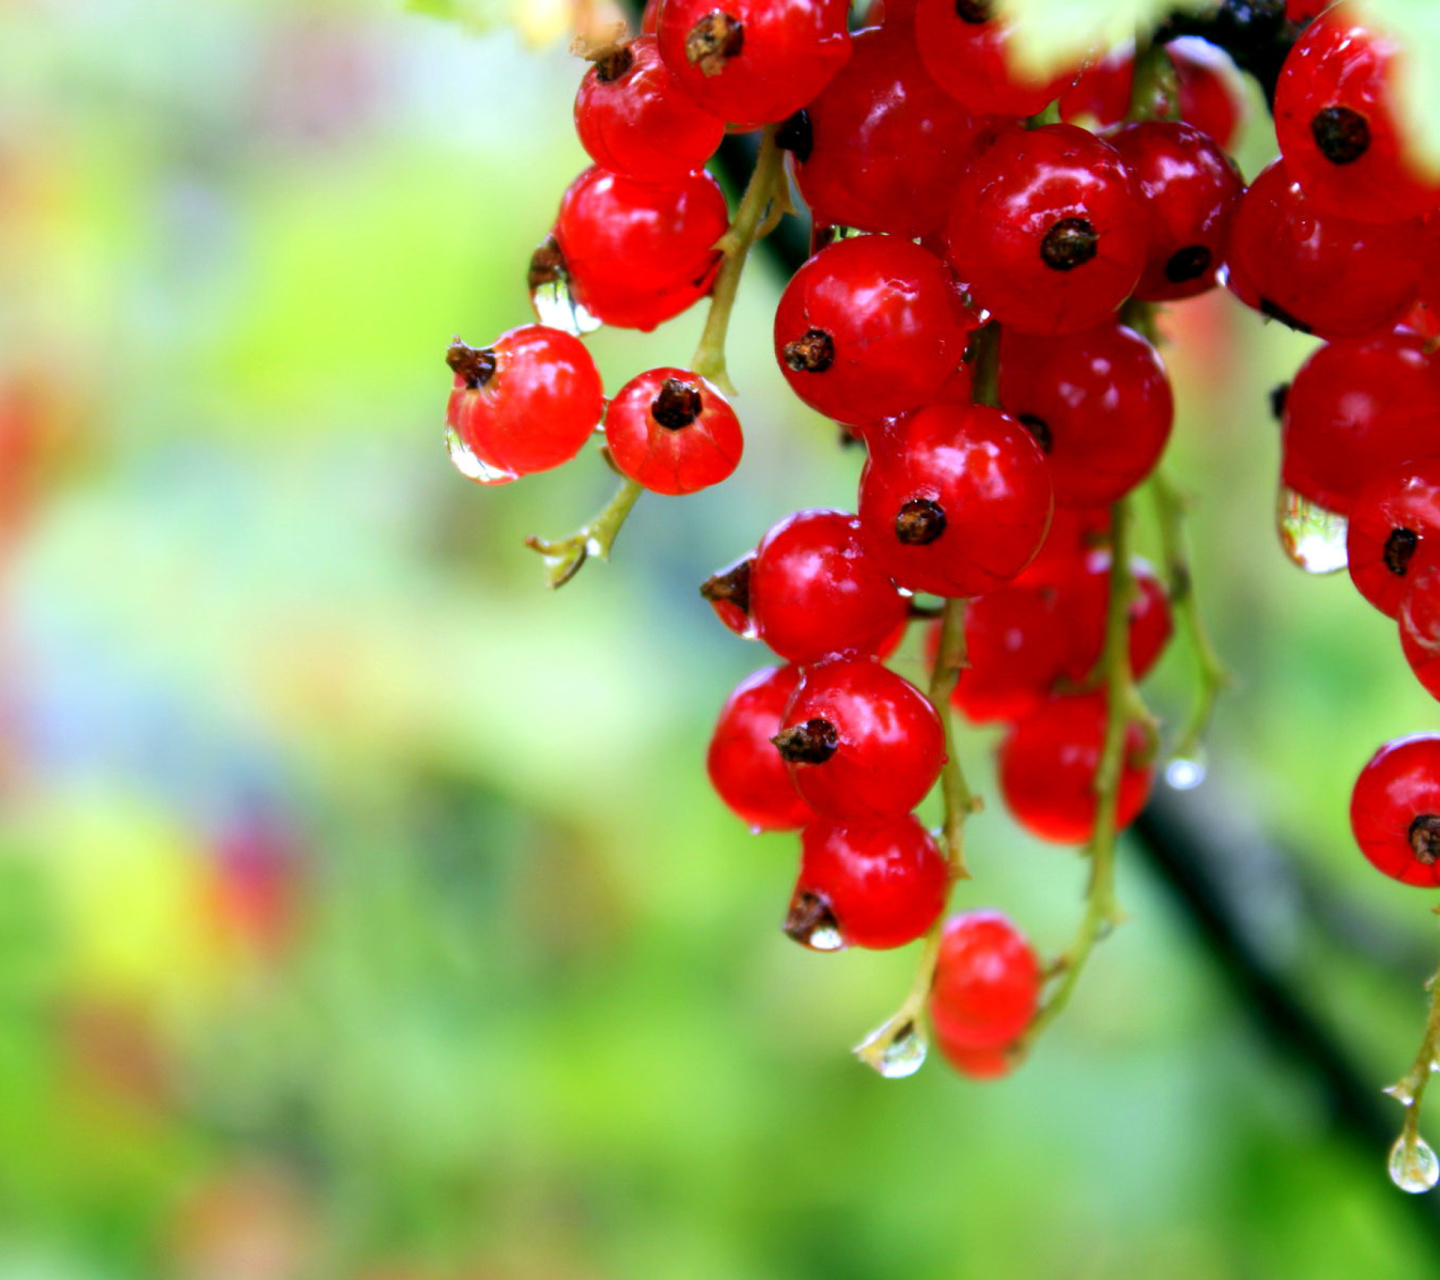 Red currant with Dew screenshot #1 1440x1280